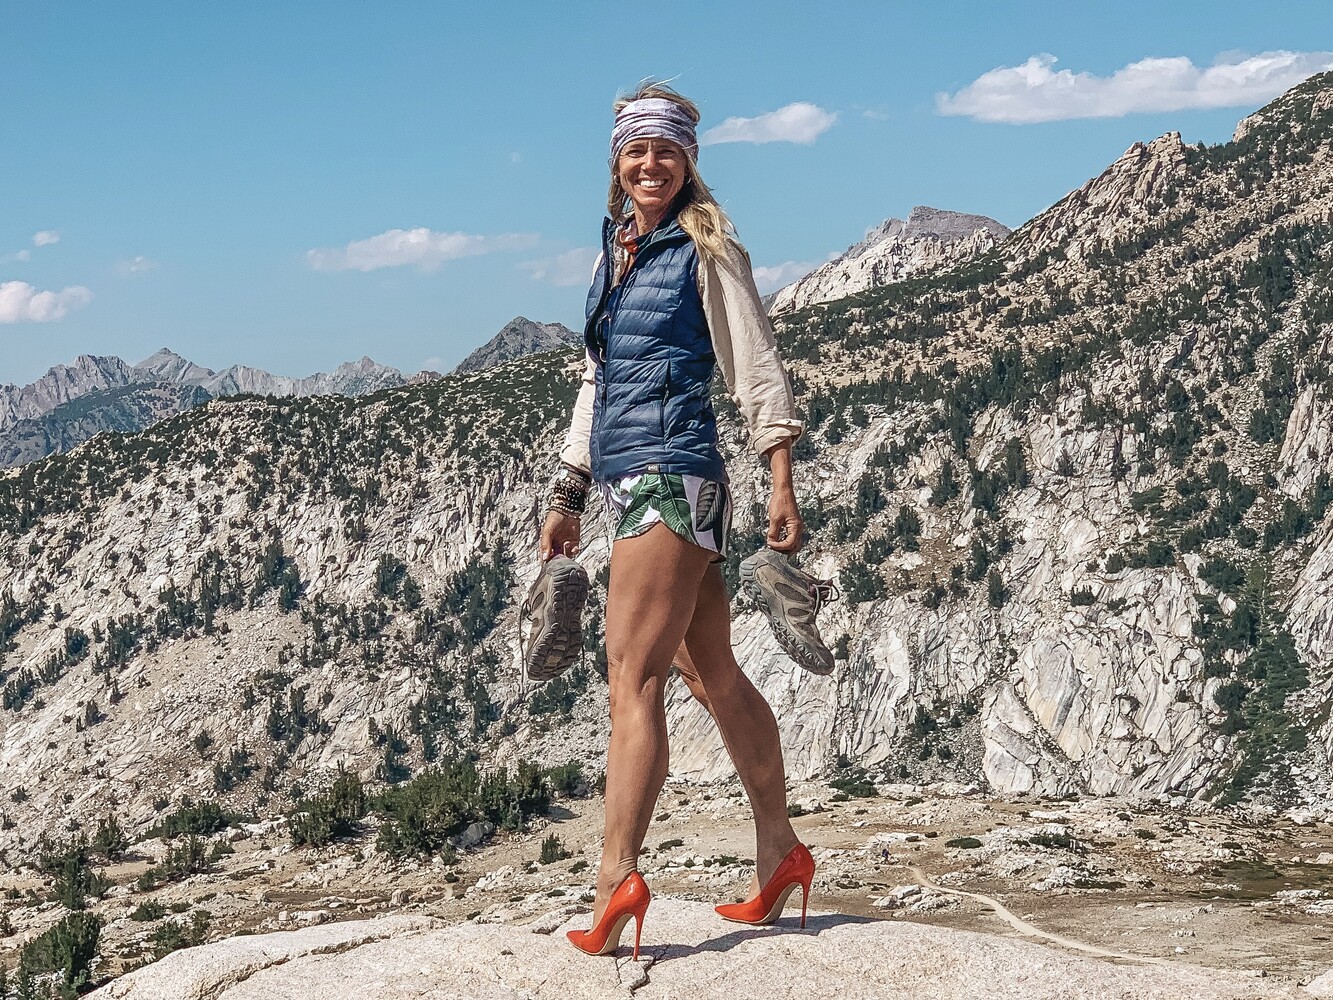 Why do you carry red heels in the backcountry? Article written by Sara Schulting Kranz